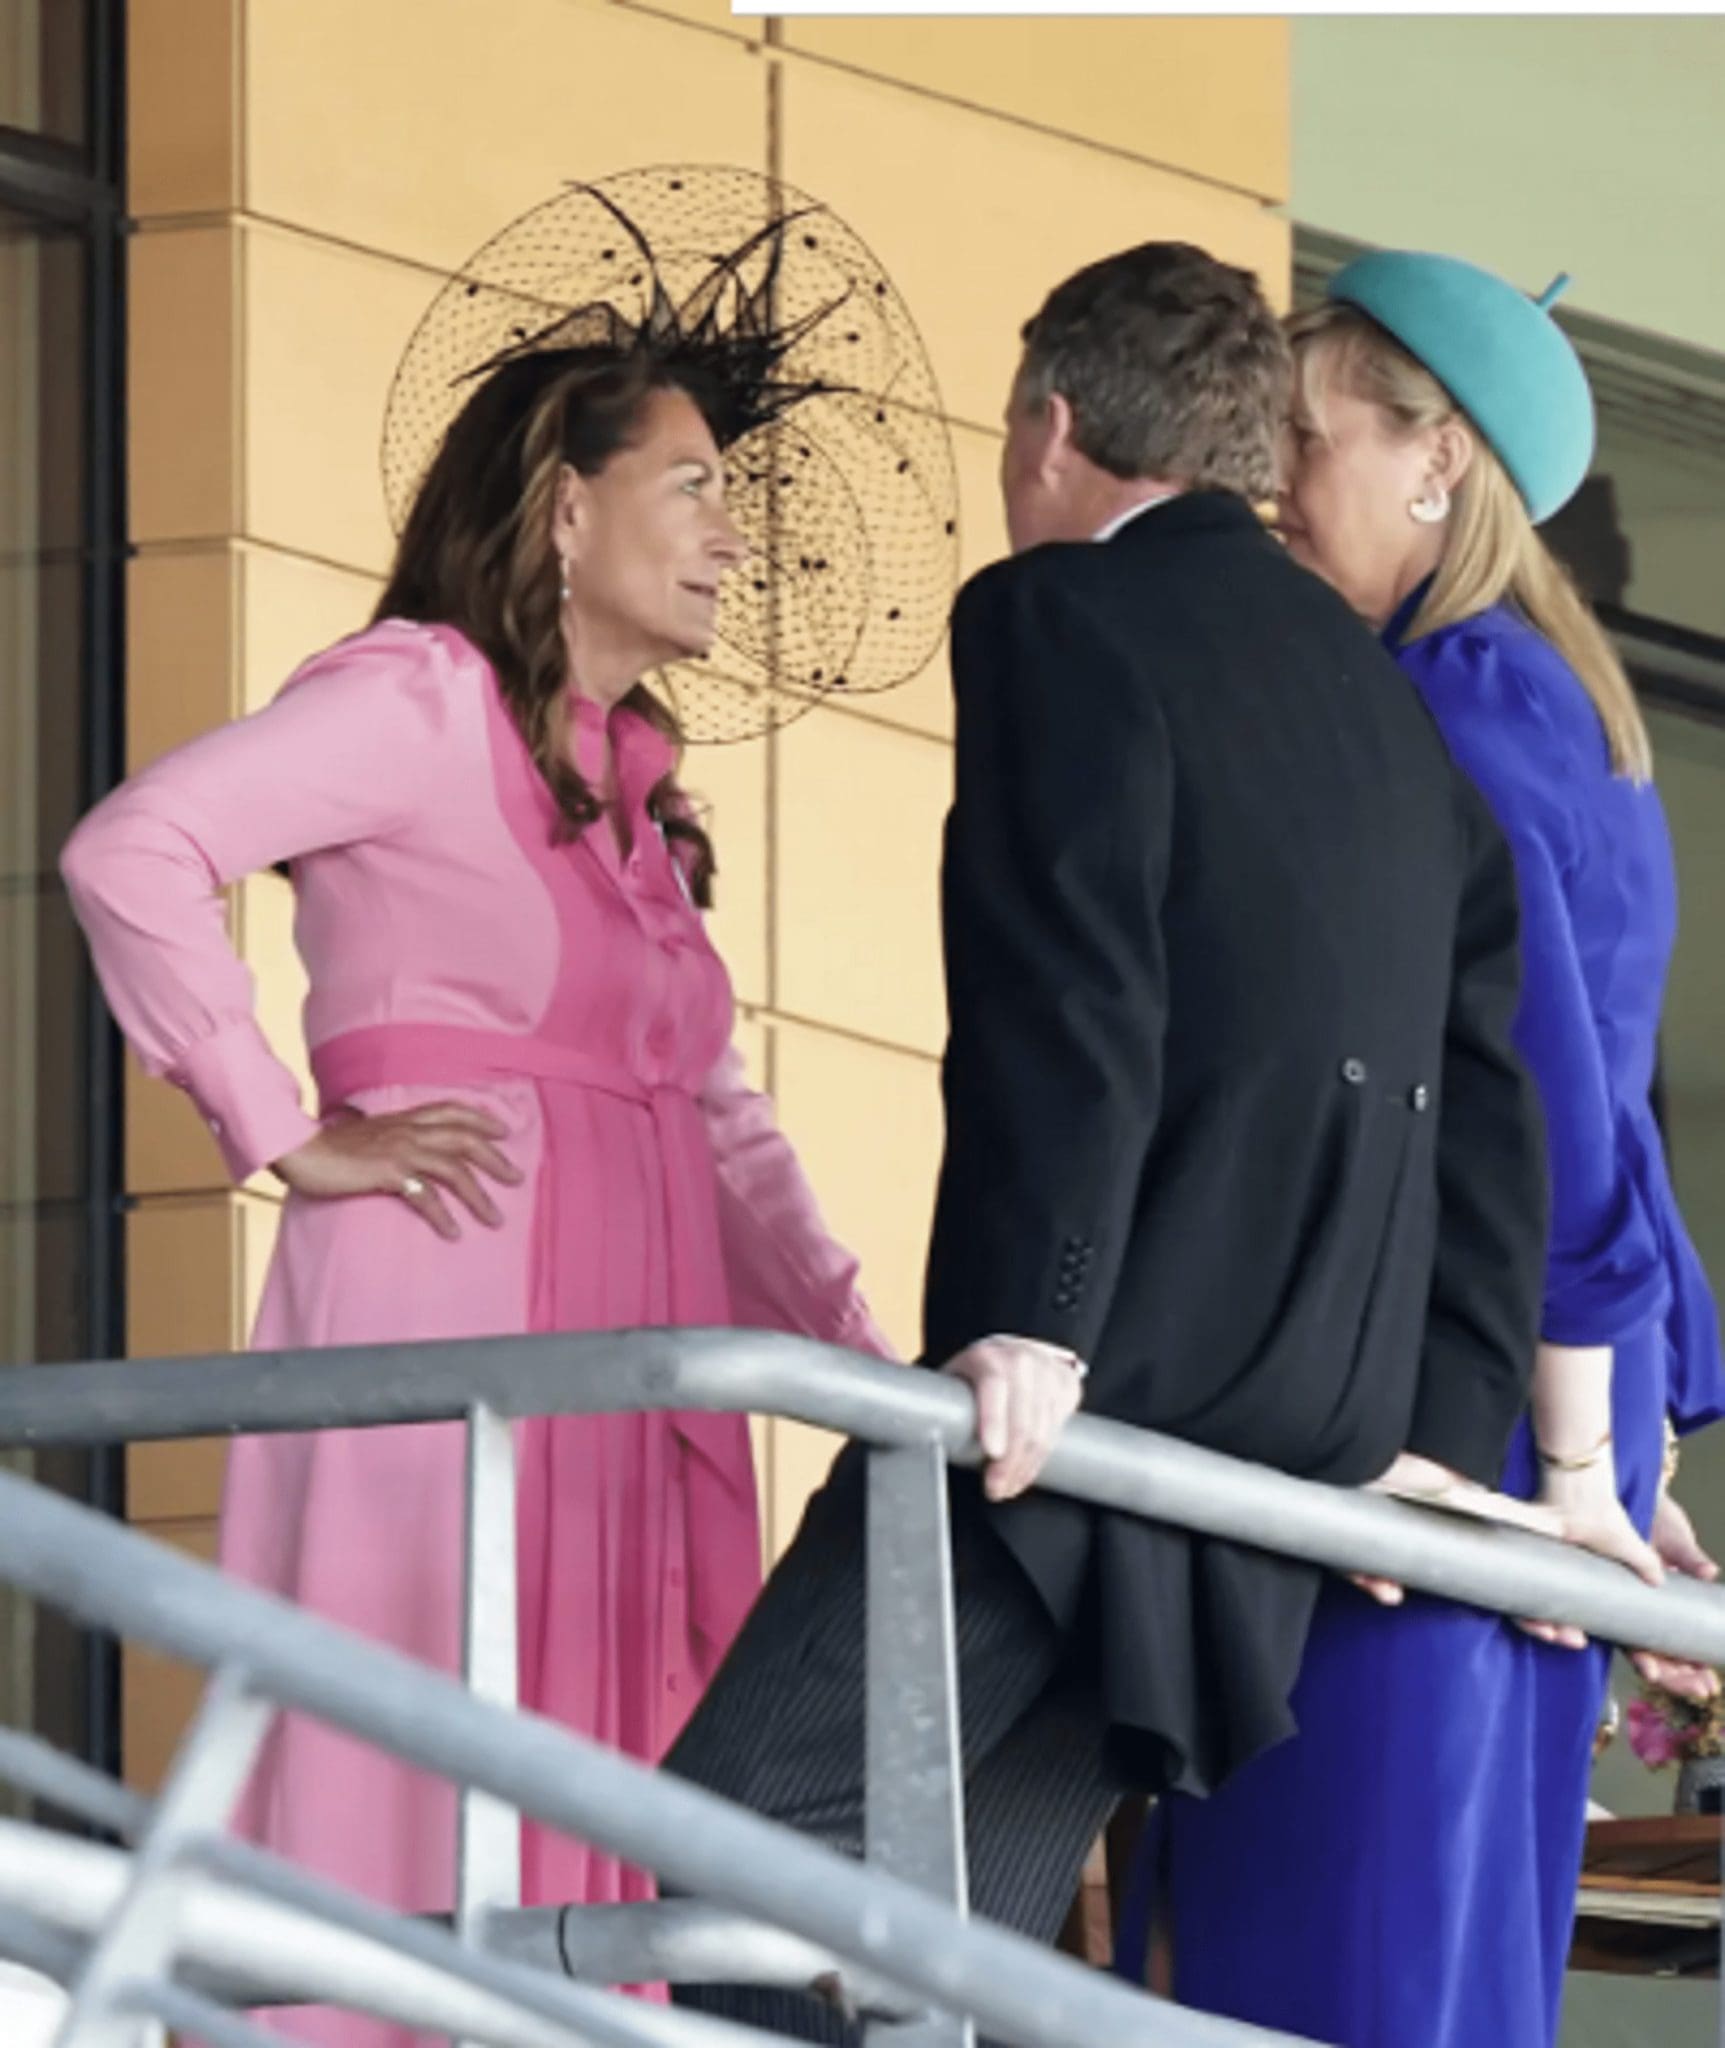 Kate Middleton's mom borrowed her daughter's dress from Ascot